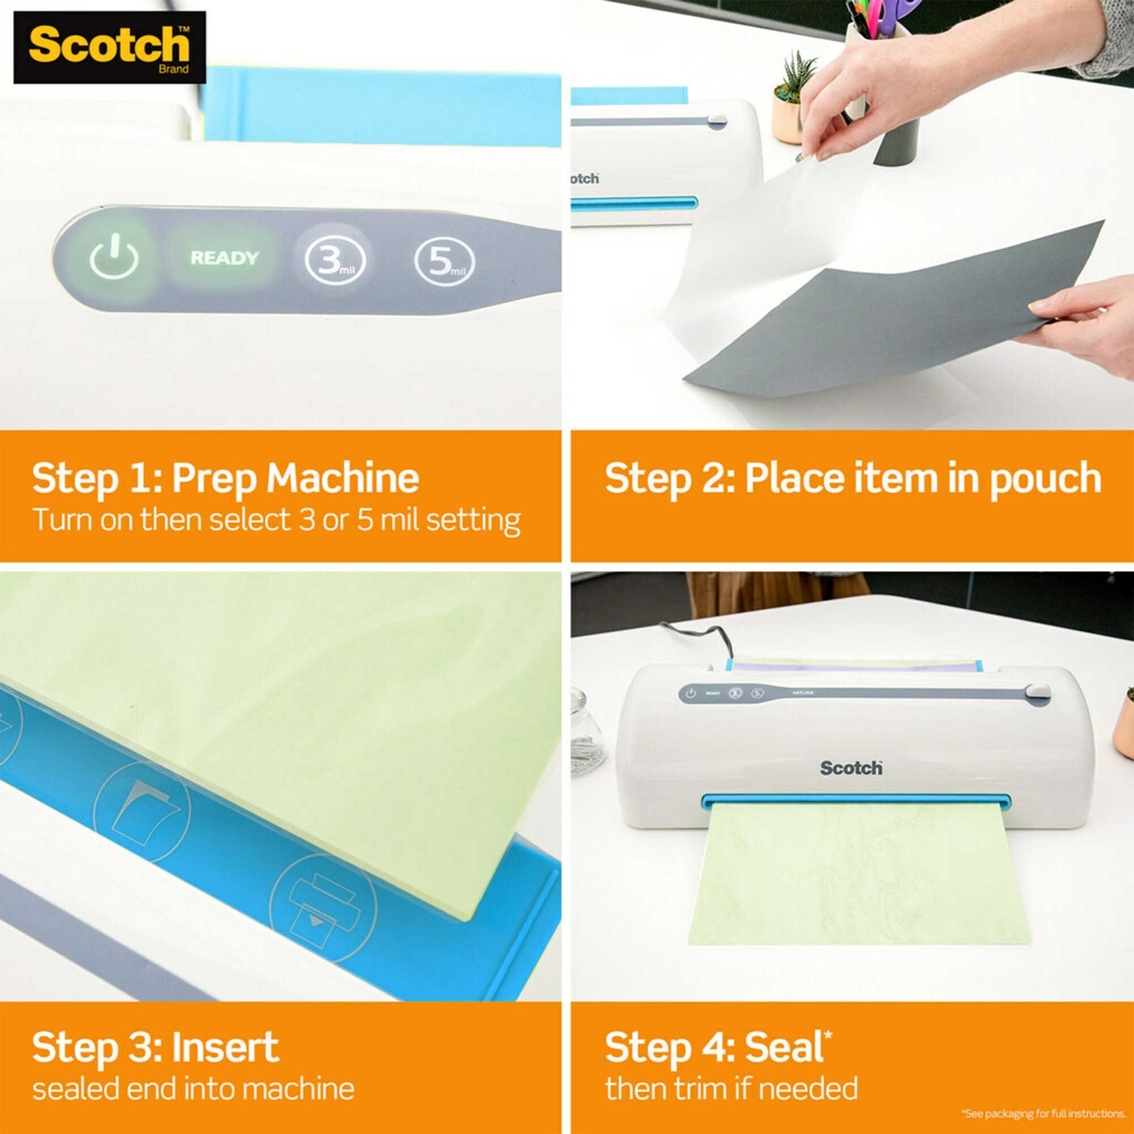 Scotch Single-Sided Laminating Sheets 9 x 12 in. - Image 9 of 10